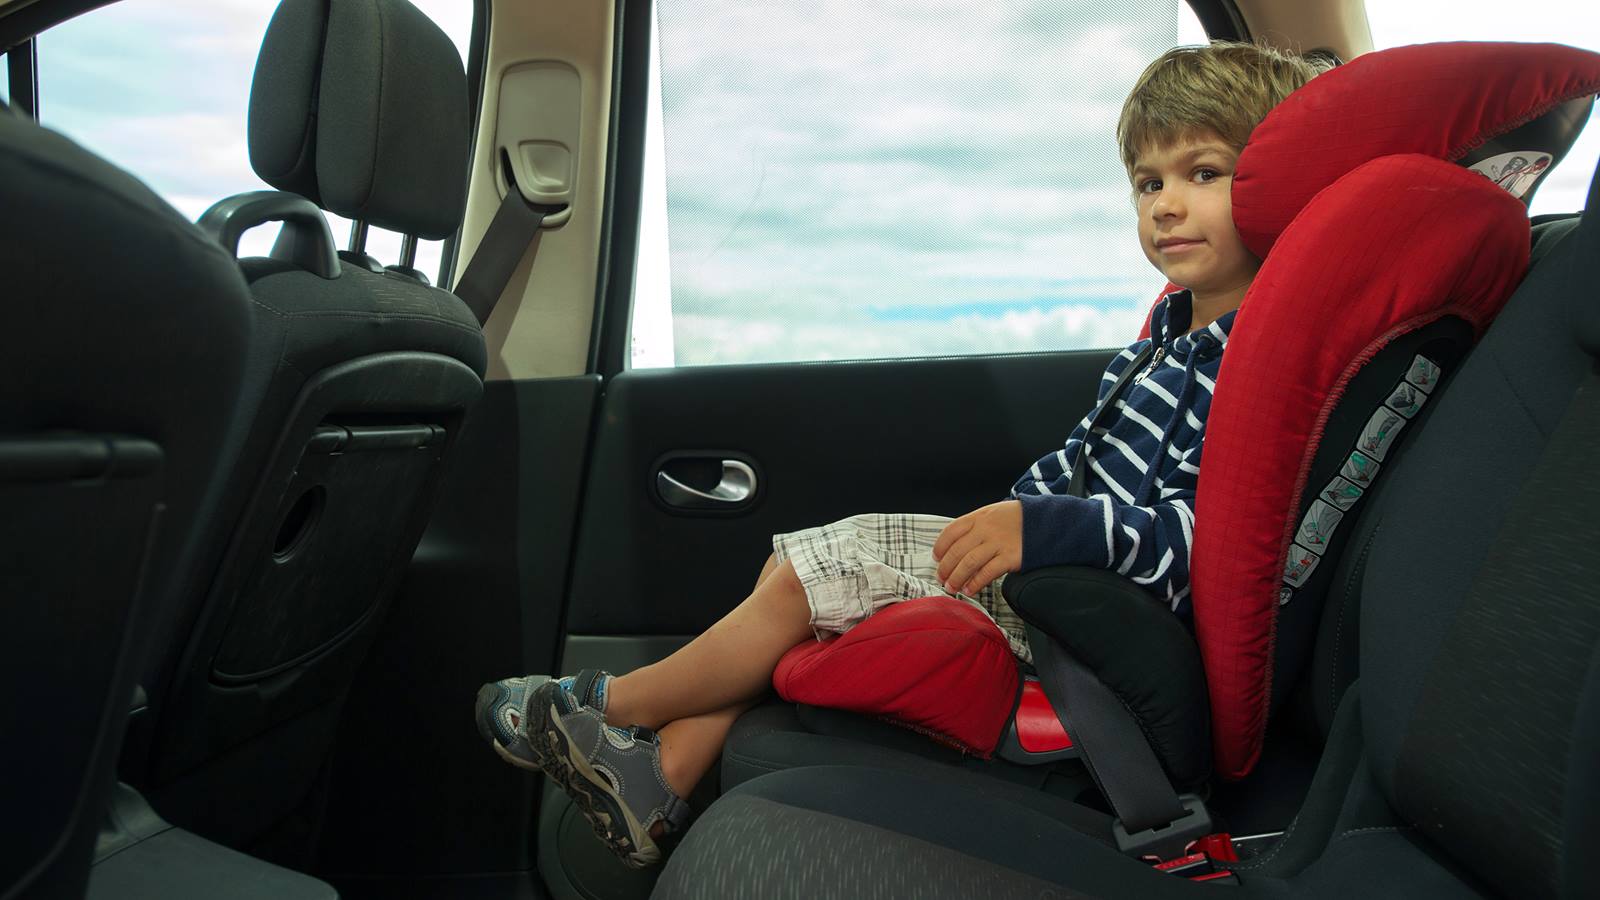 Child Ready To Move Into A Booster Seat, How Old Until A Child Can Use Booster Seat